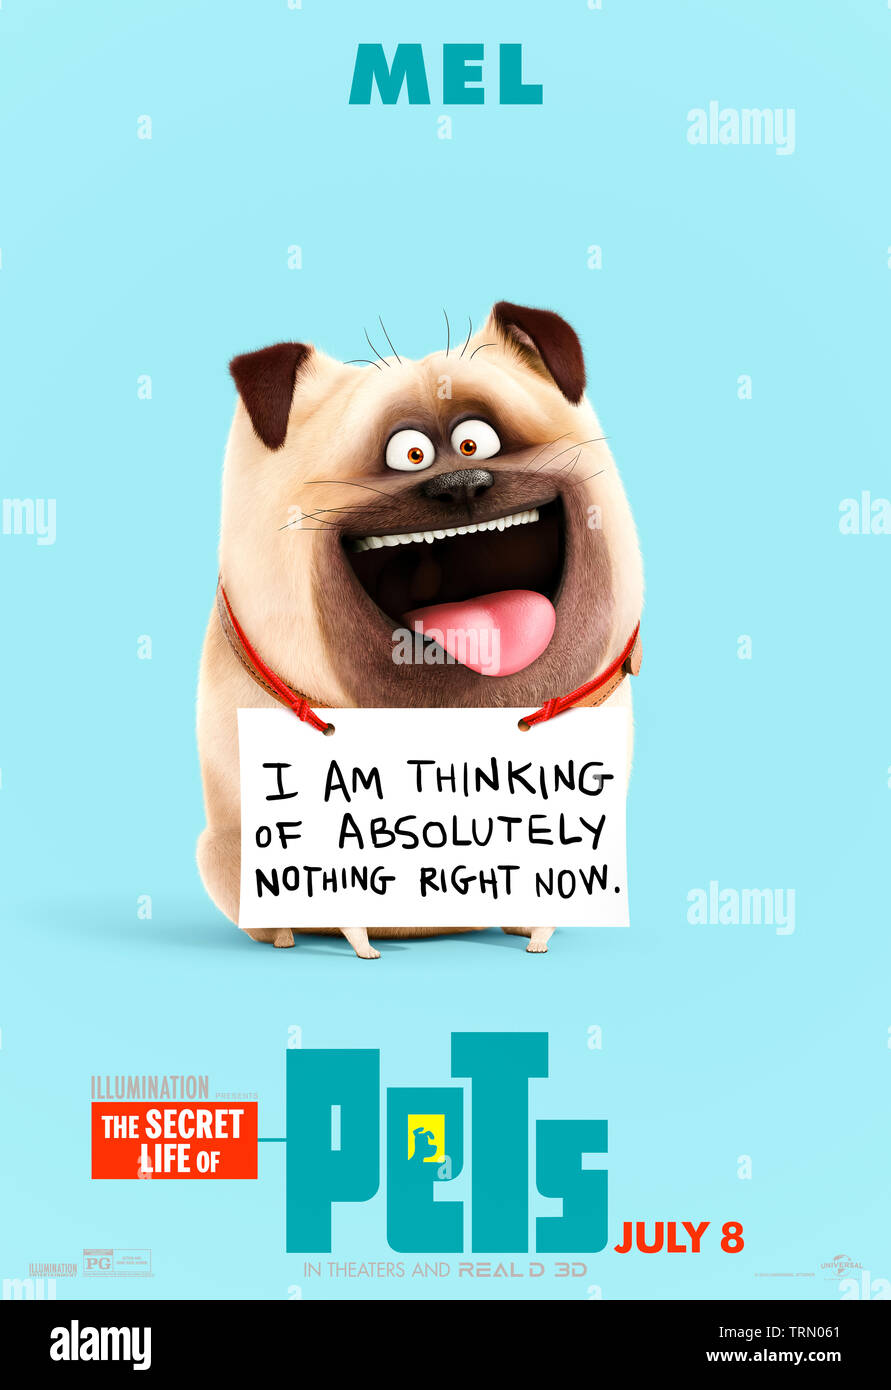 The Secret Life of Pets 2 (2019) directed by Chris Renaud and starring Mel voiced by Bobby Moynihan. Animated sequel about what pets get up to whilst their owners are out for the day. Stock Photo